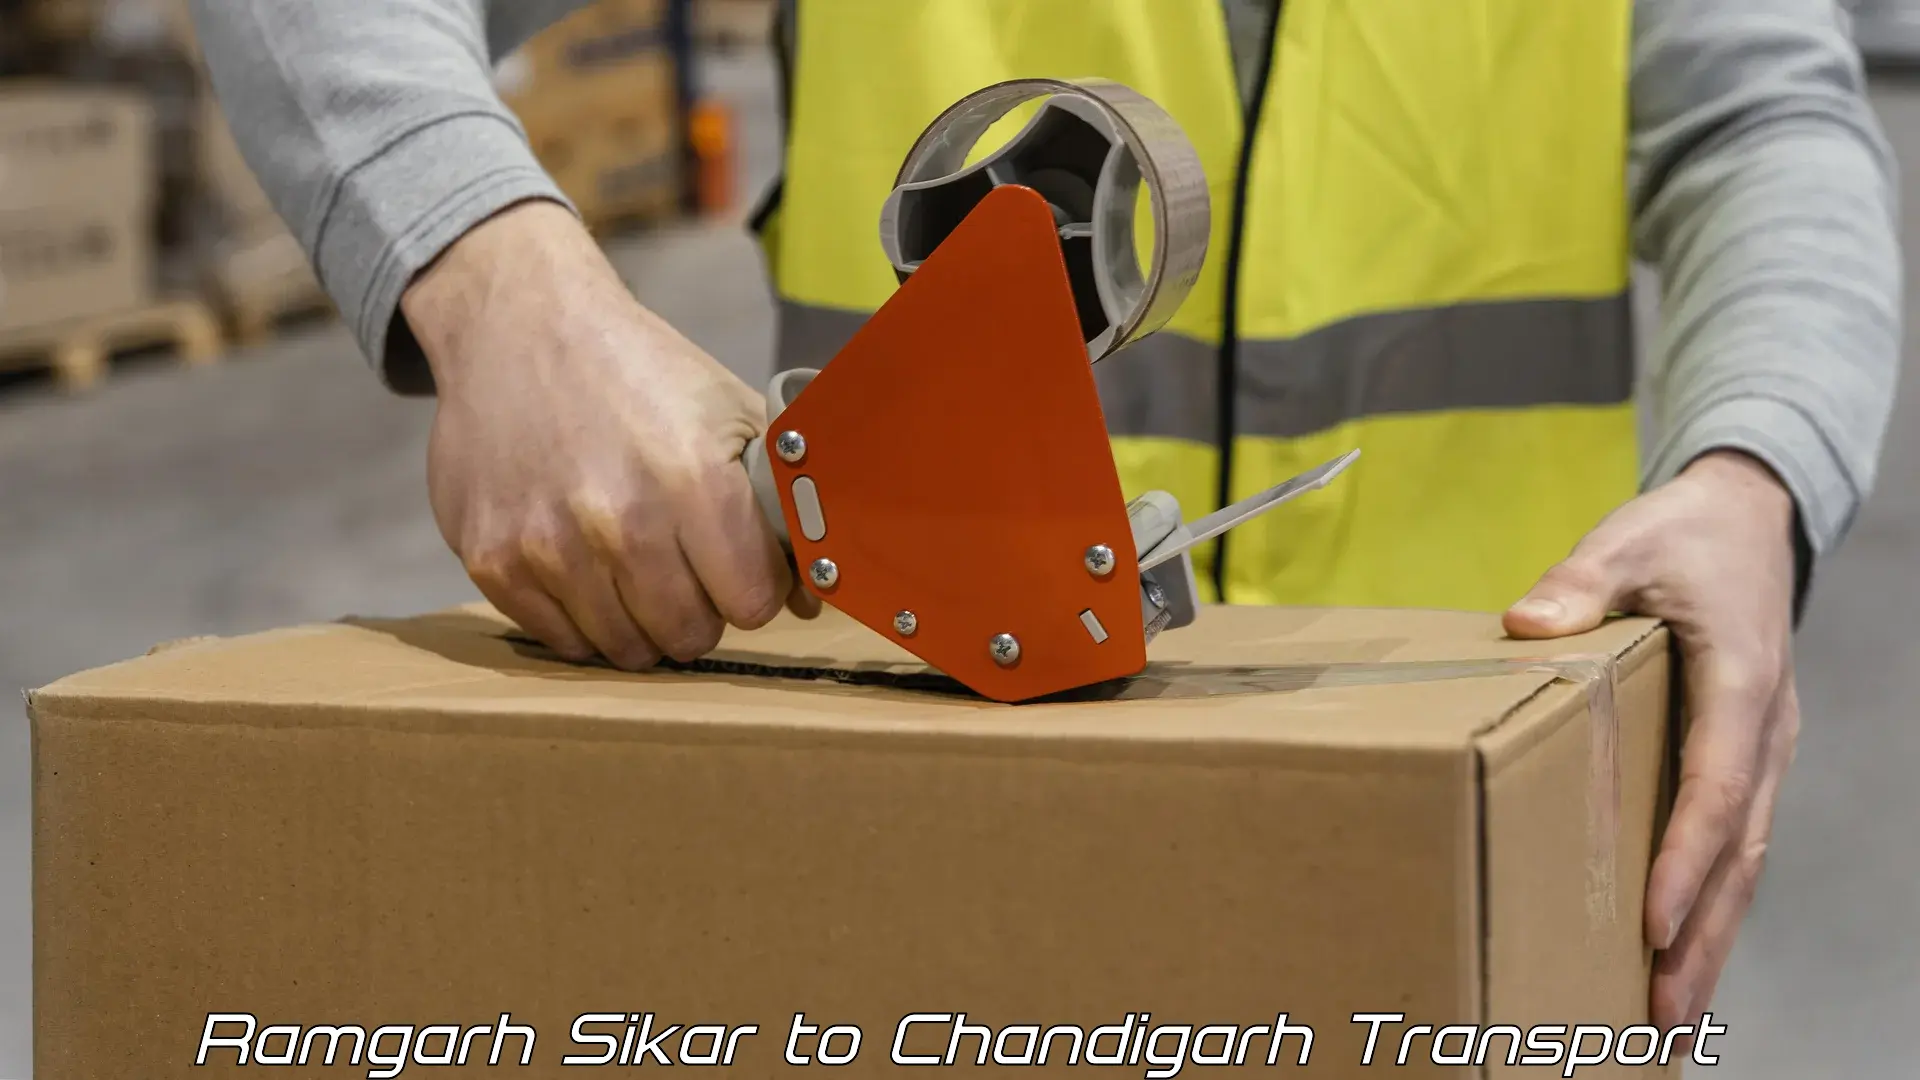 Material transport services Ramgarh Sikar to Chandigarh